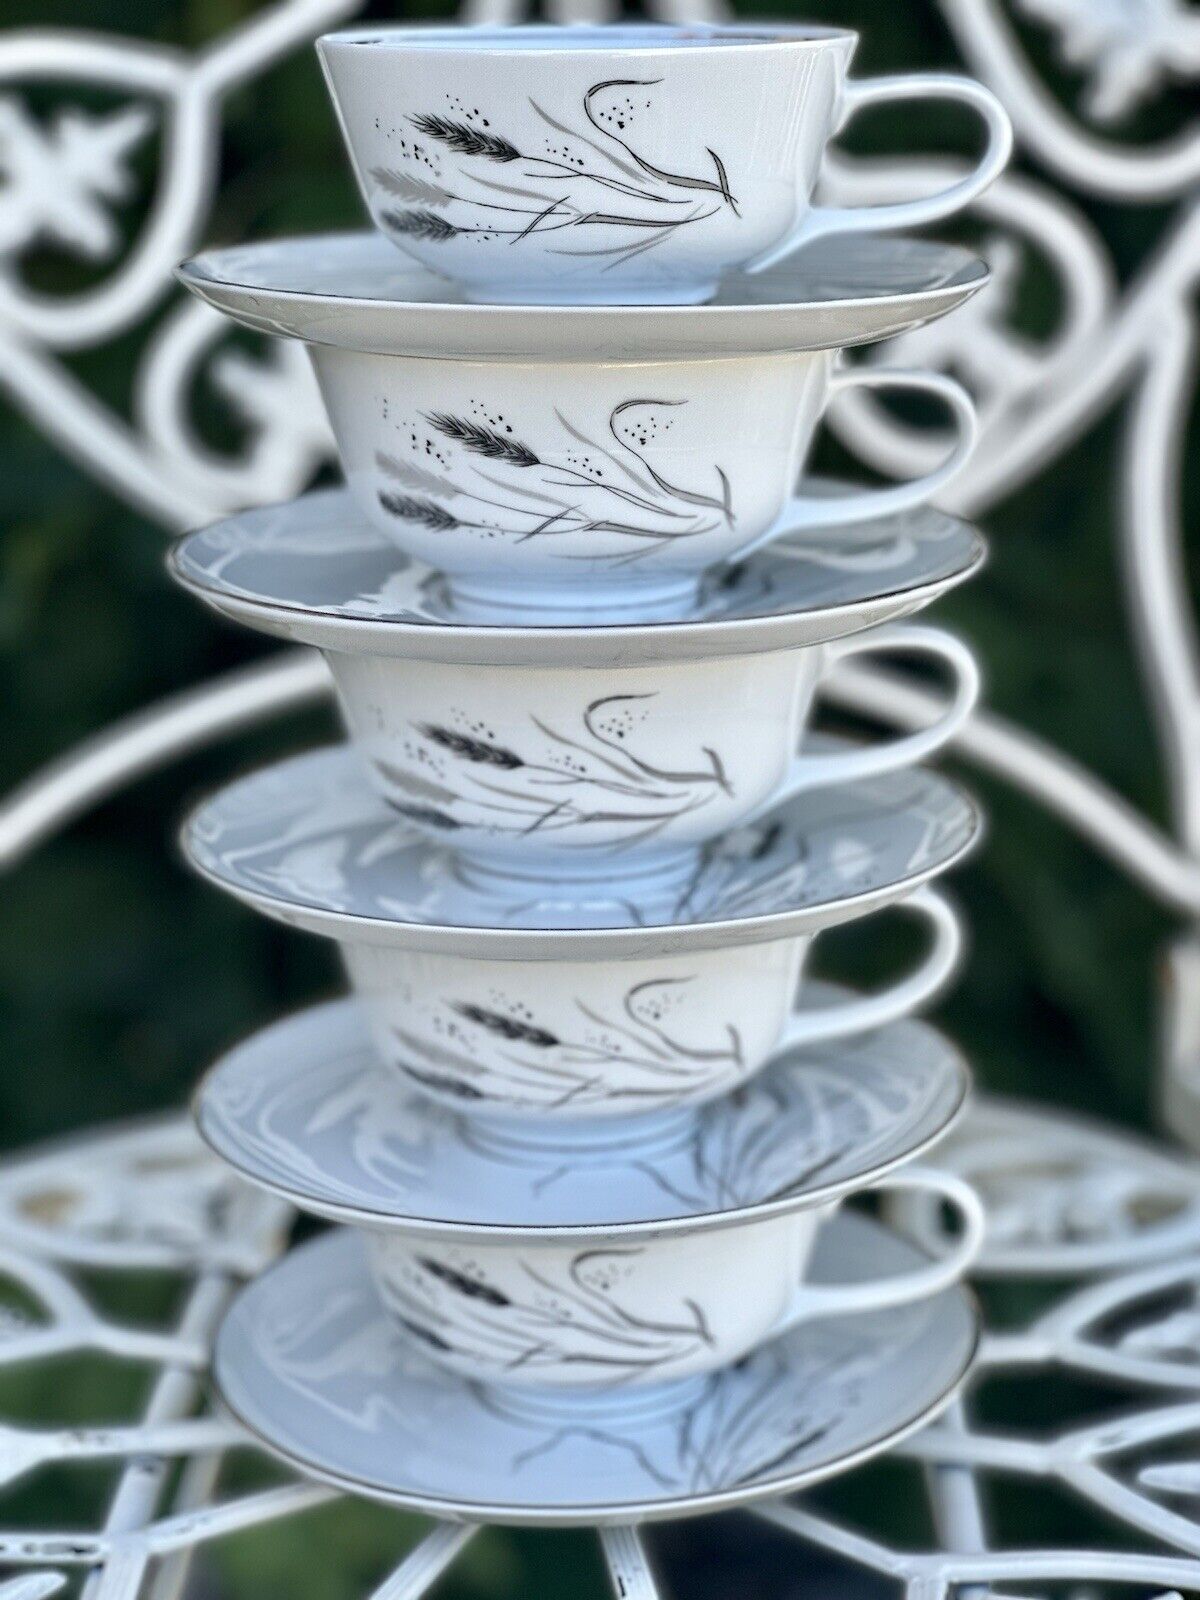 Vintage Easterling, China Teacup Set And Saucer Five Sets Available ￼